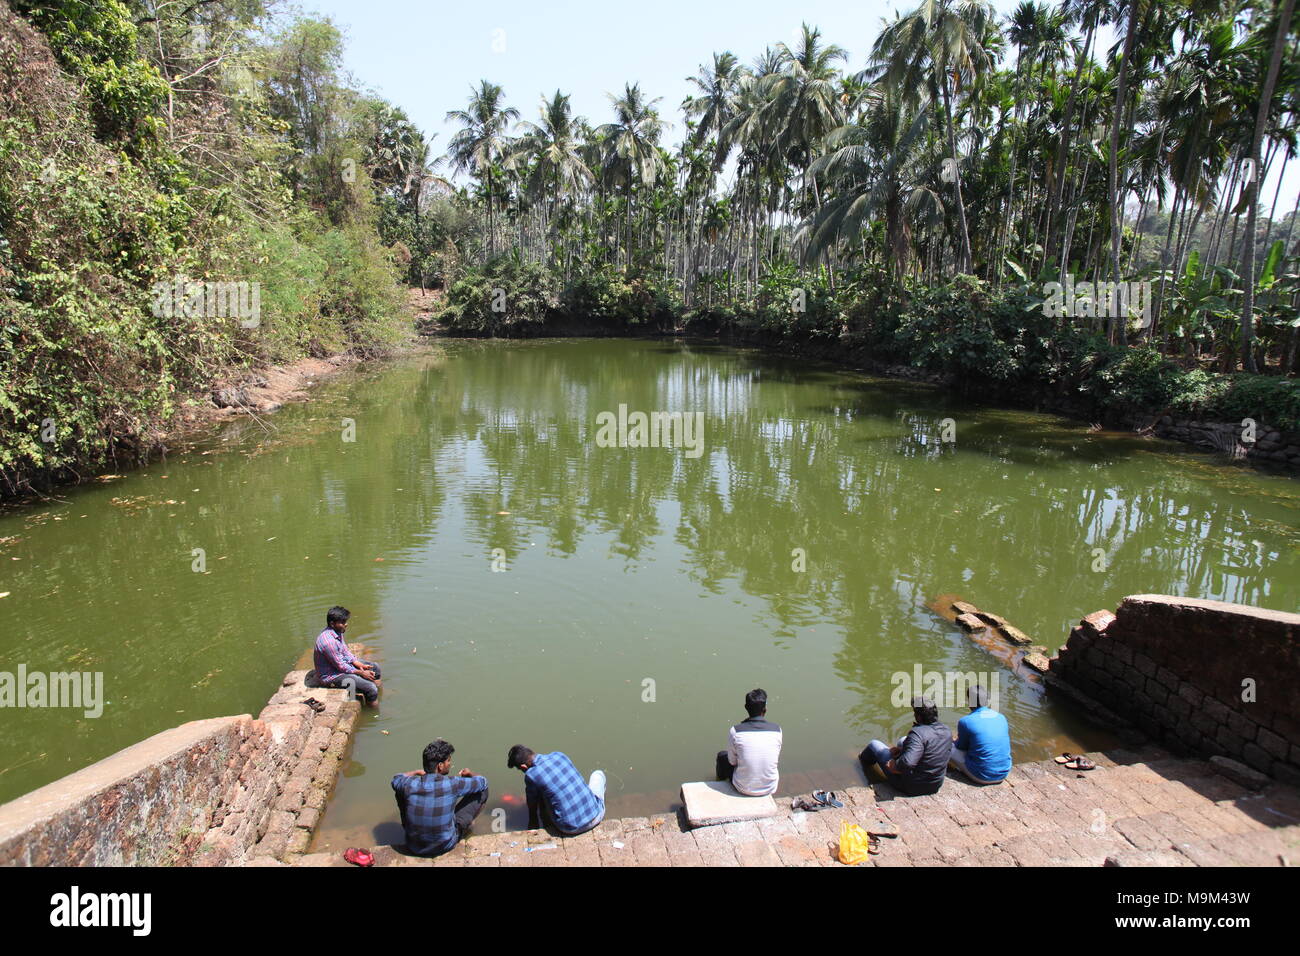 boys near a temple pond at a village in thrissur,kerala,surrounded by coconut trees Stock Photo